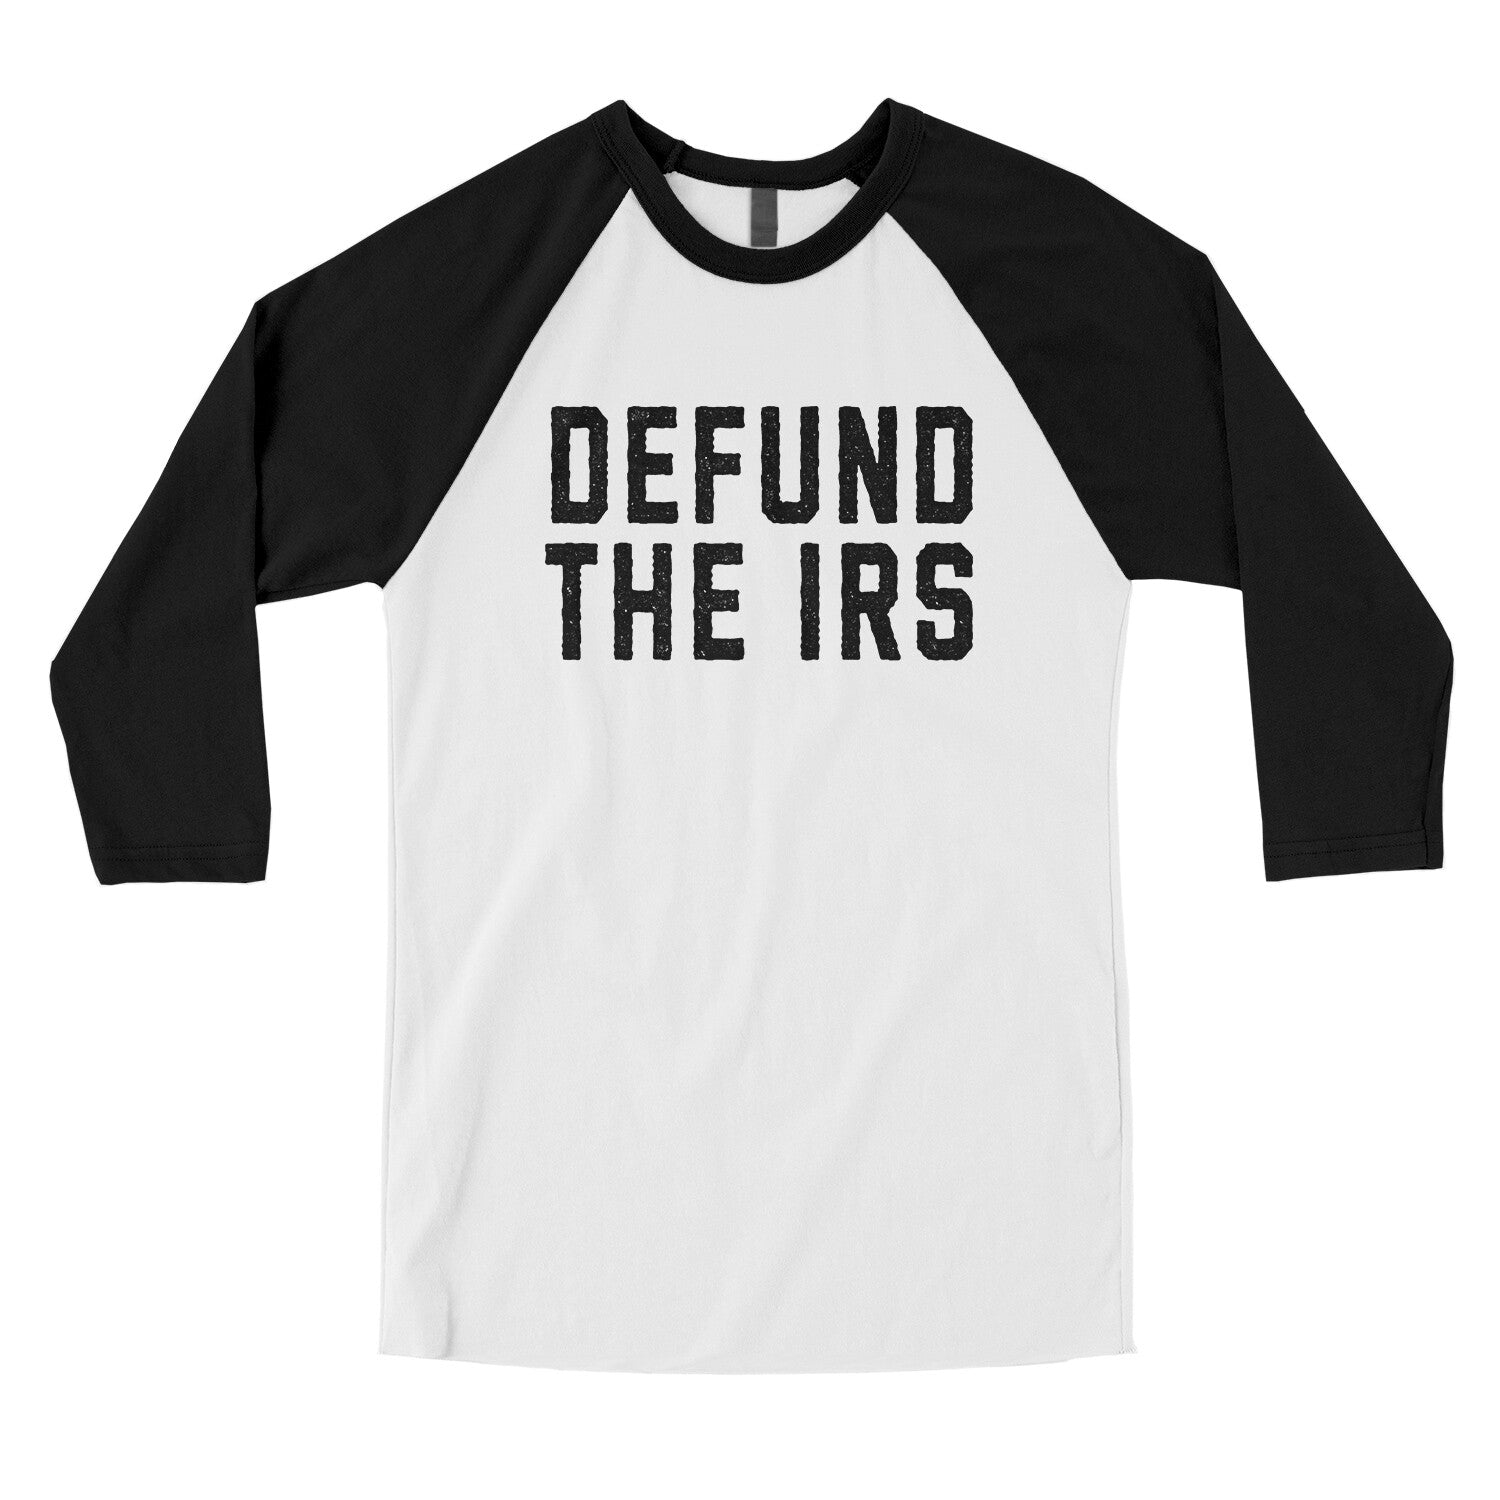 Defund the IRS in White with Black Color